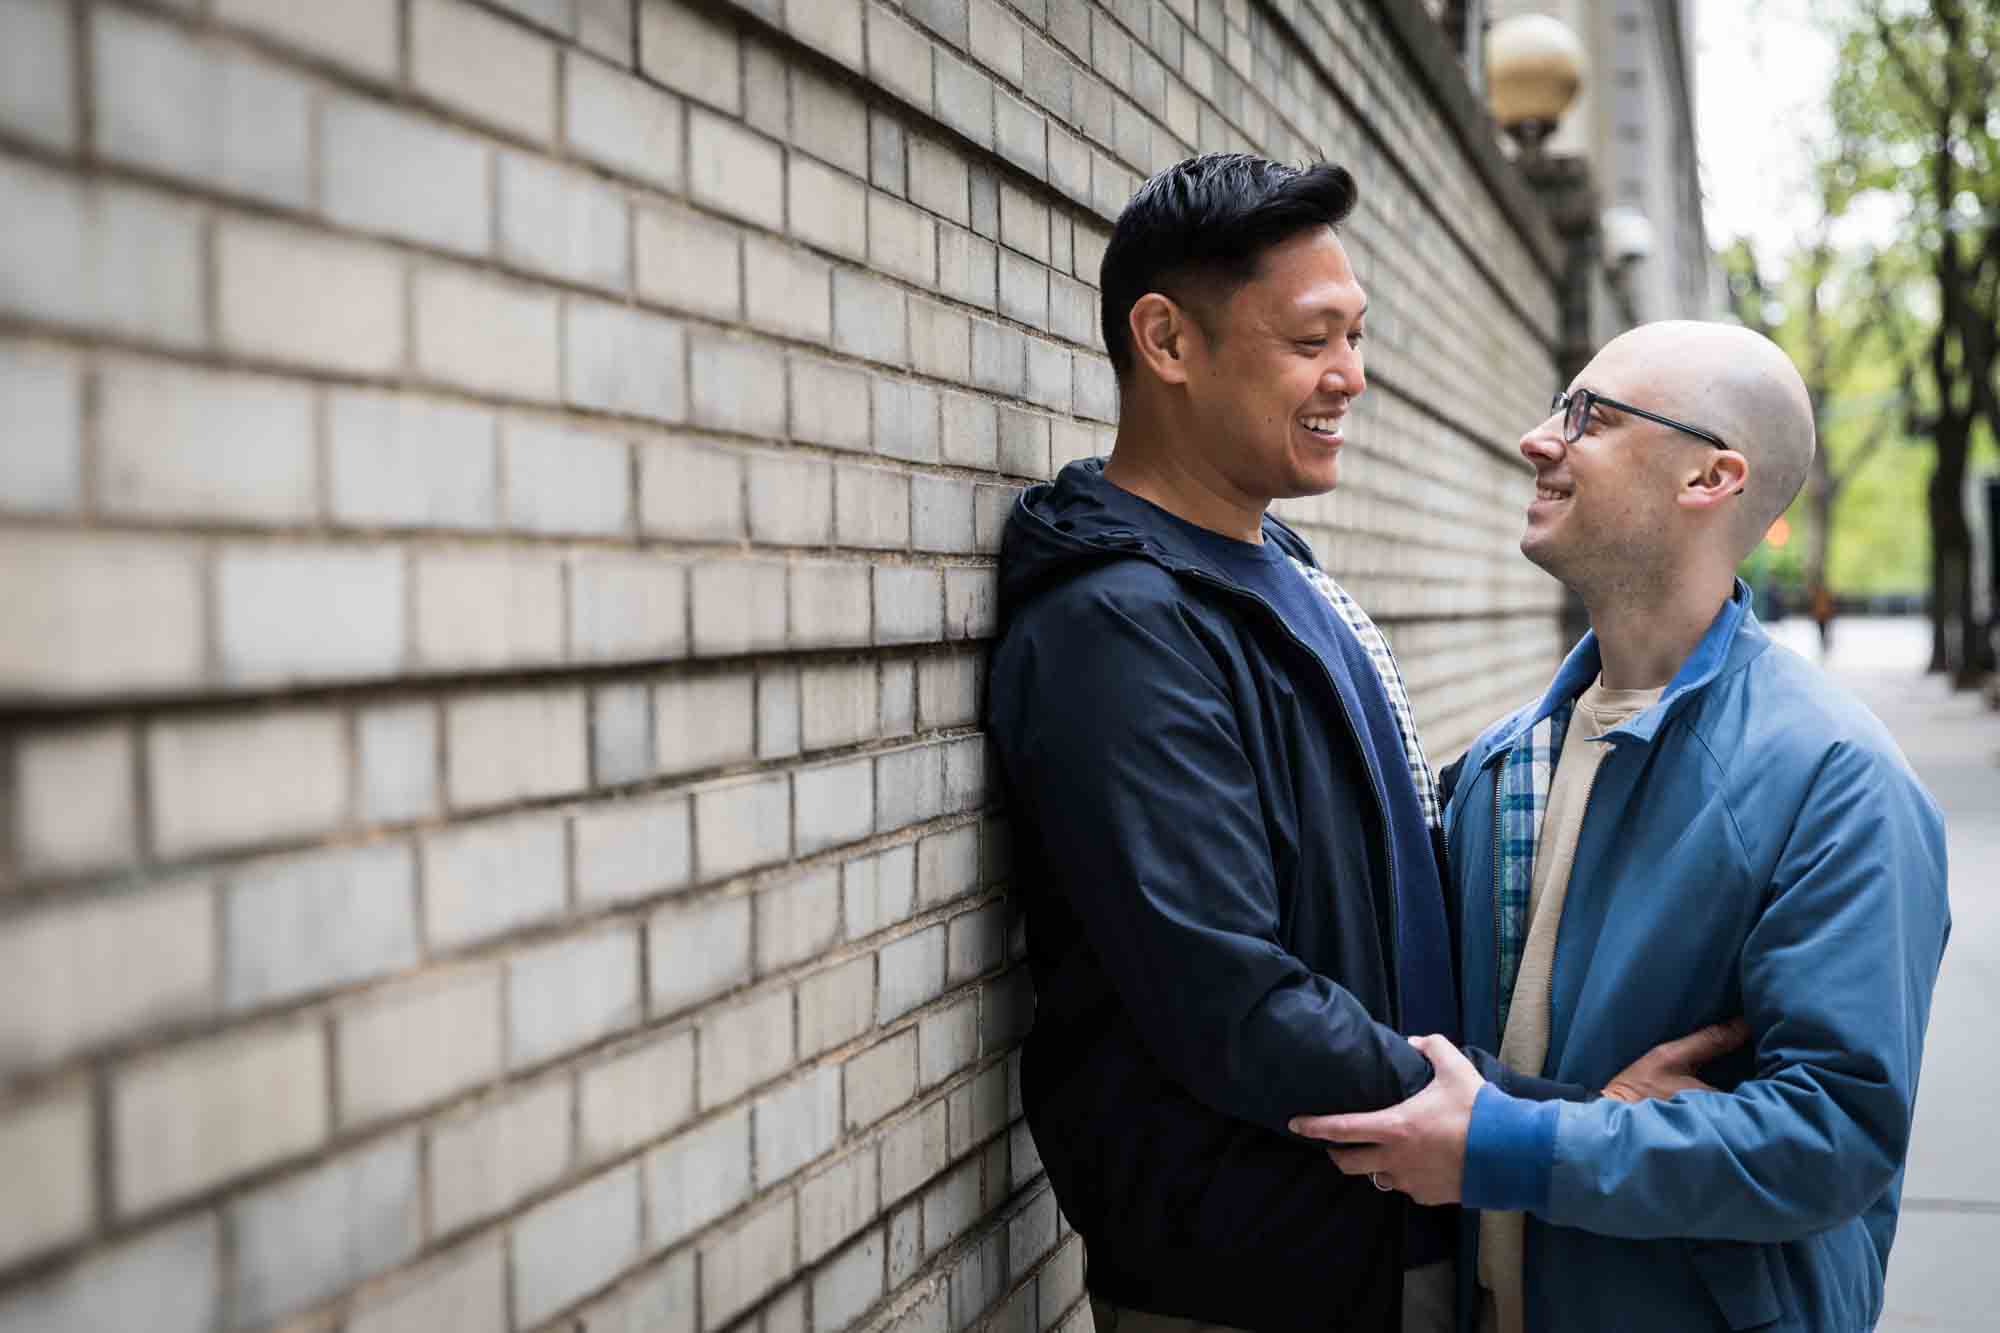 Two men embracing in front of brick wall